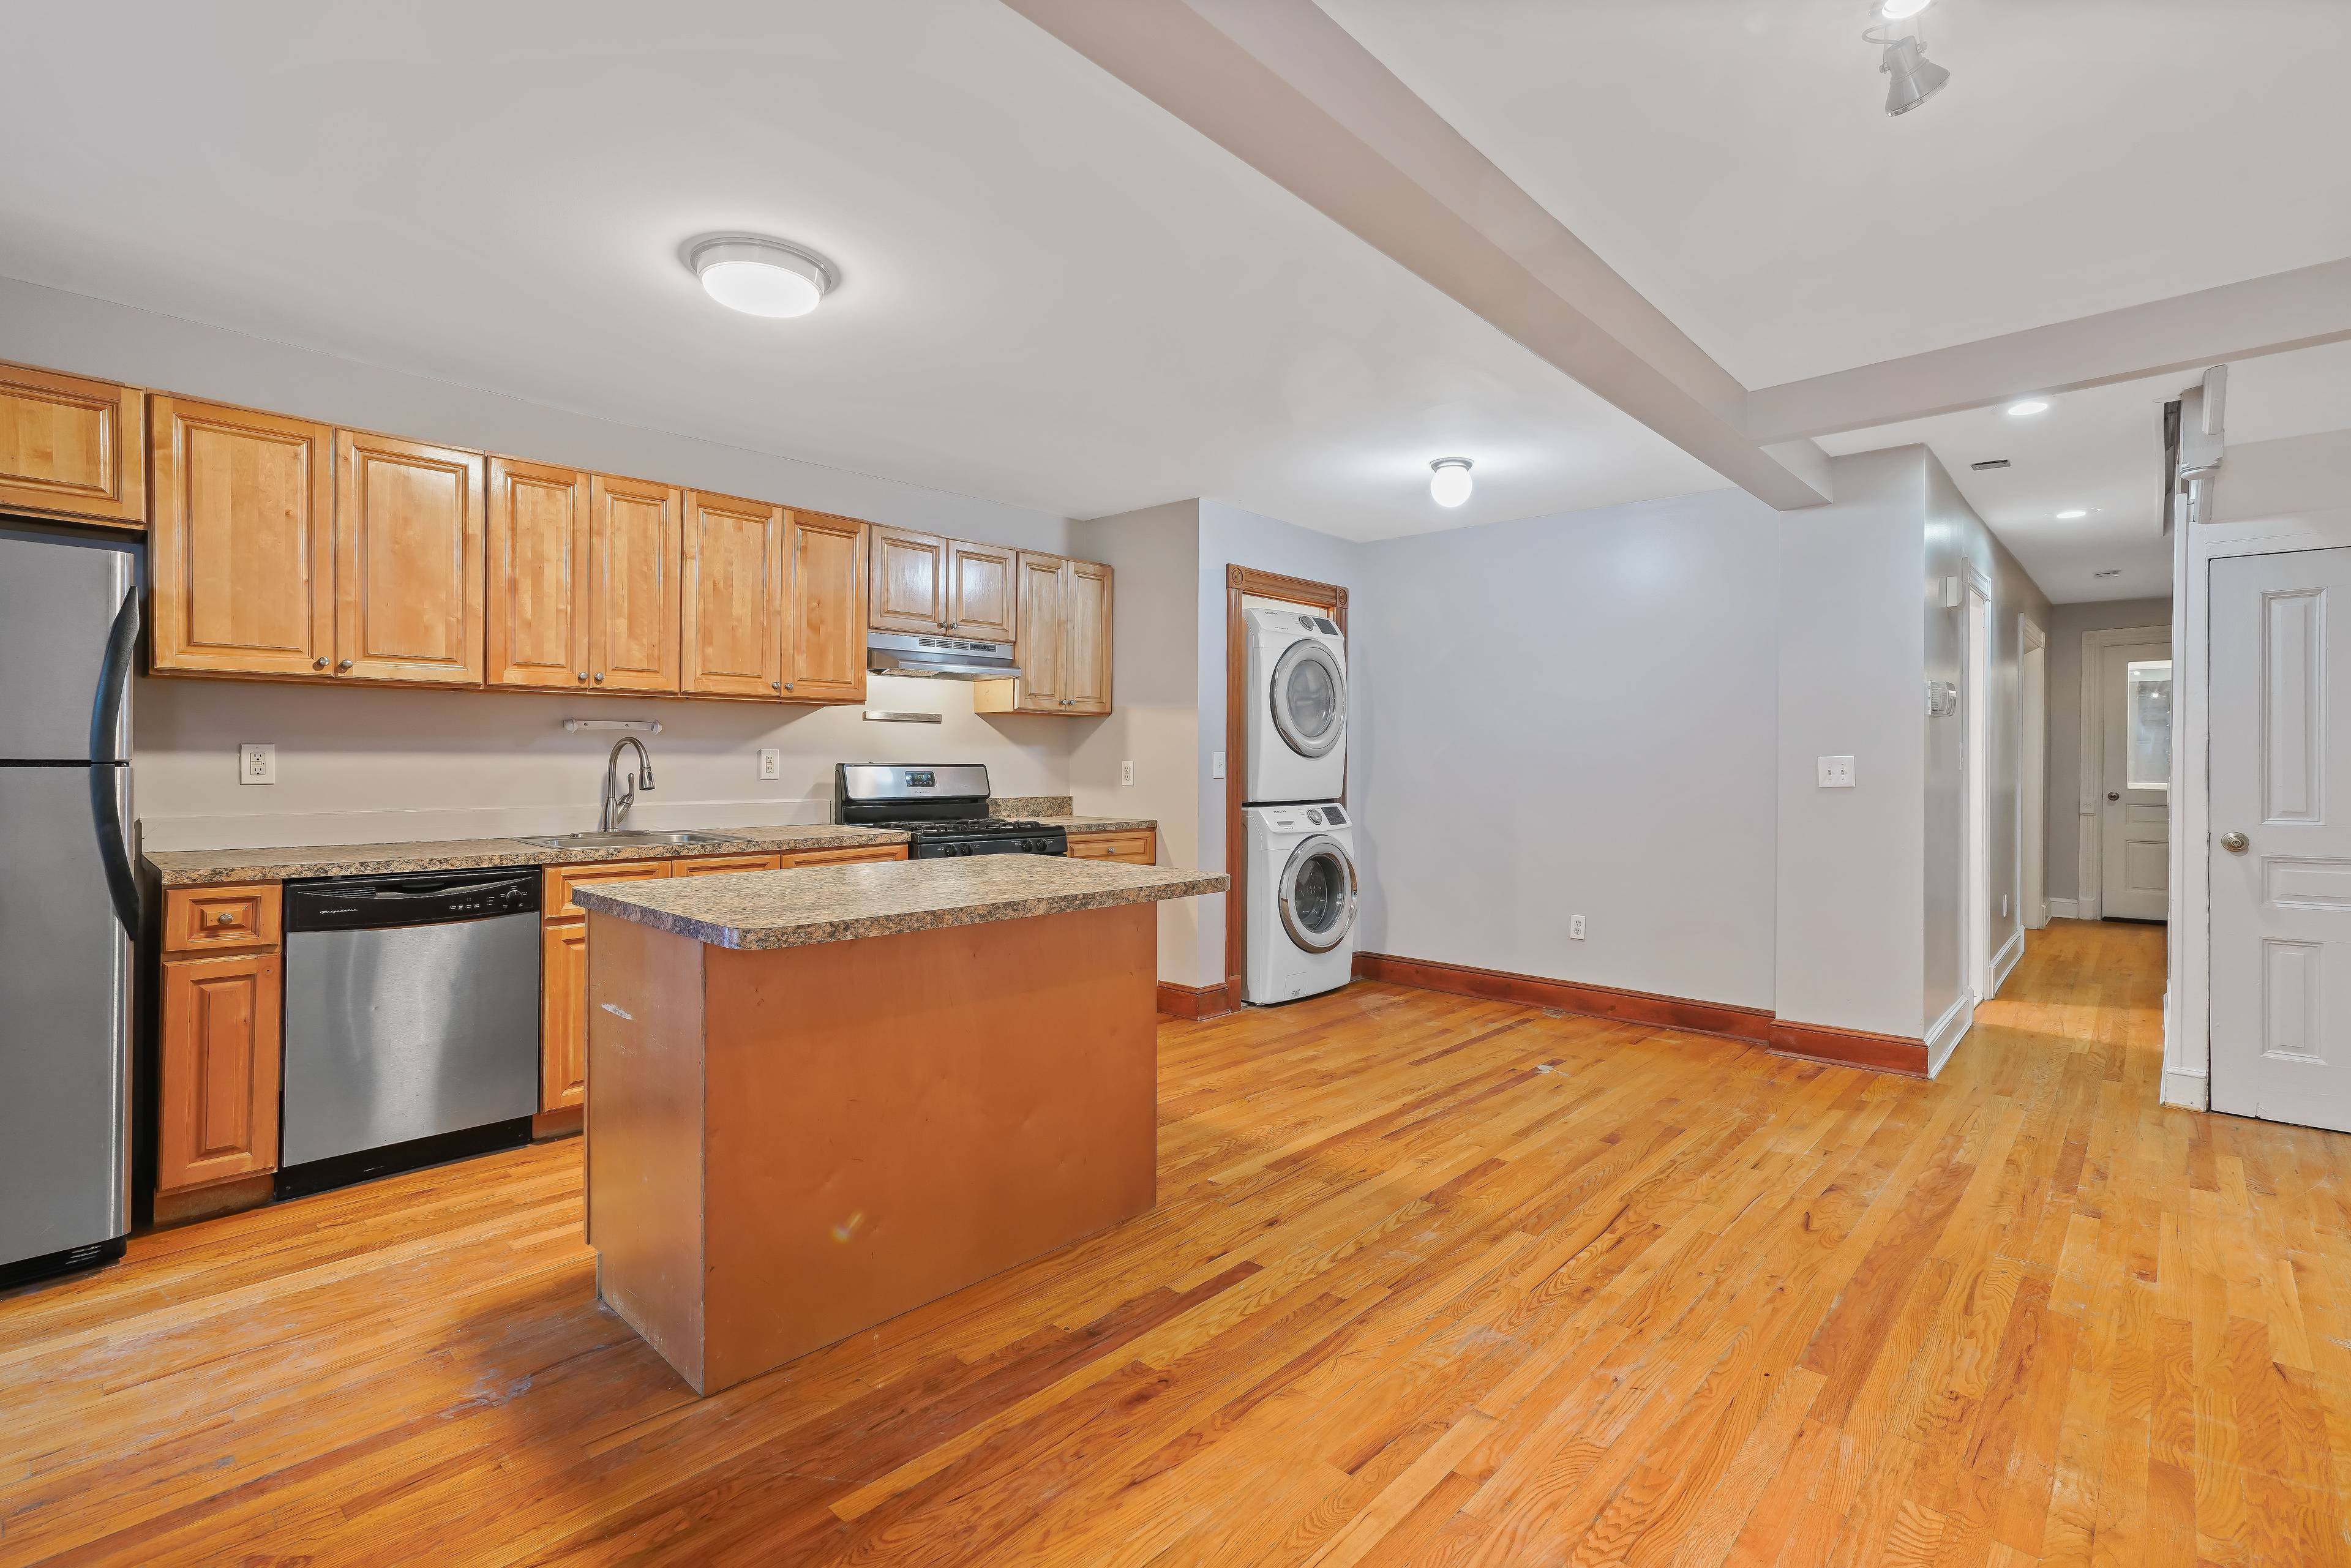 Marvelous Brownstone featuring 3BED 2BATH DUPLEX apartment with GARDEN OUTDOOR SPACE on a beautiful tree lined block in Bedford Stuyvesant.